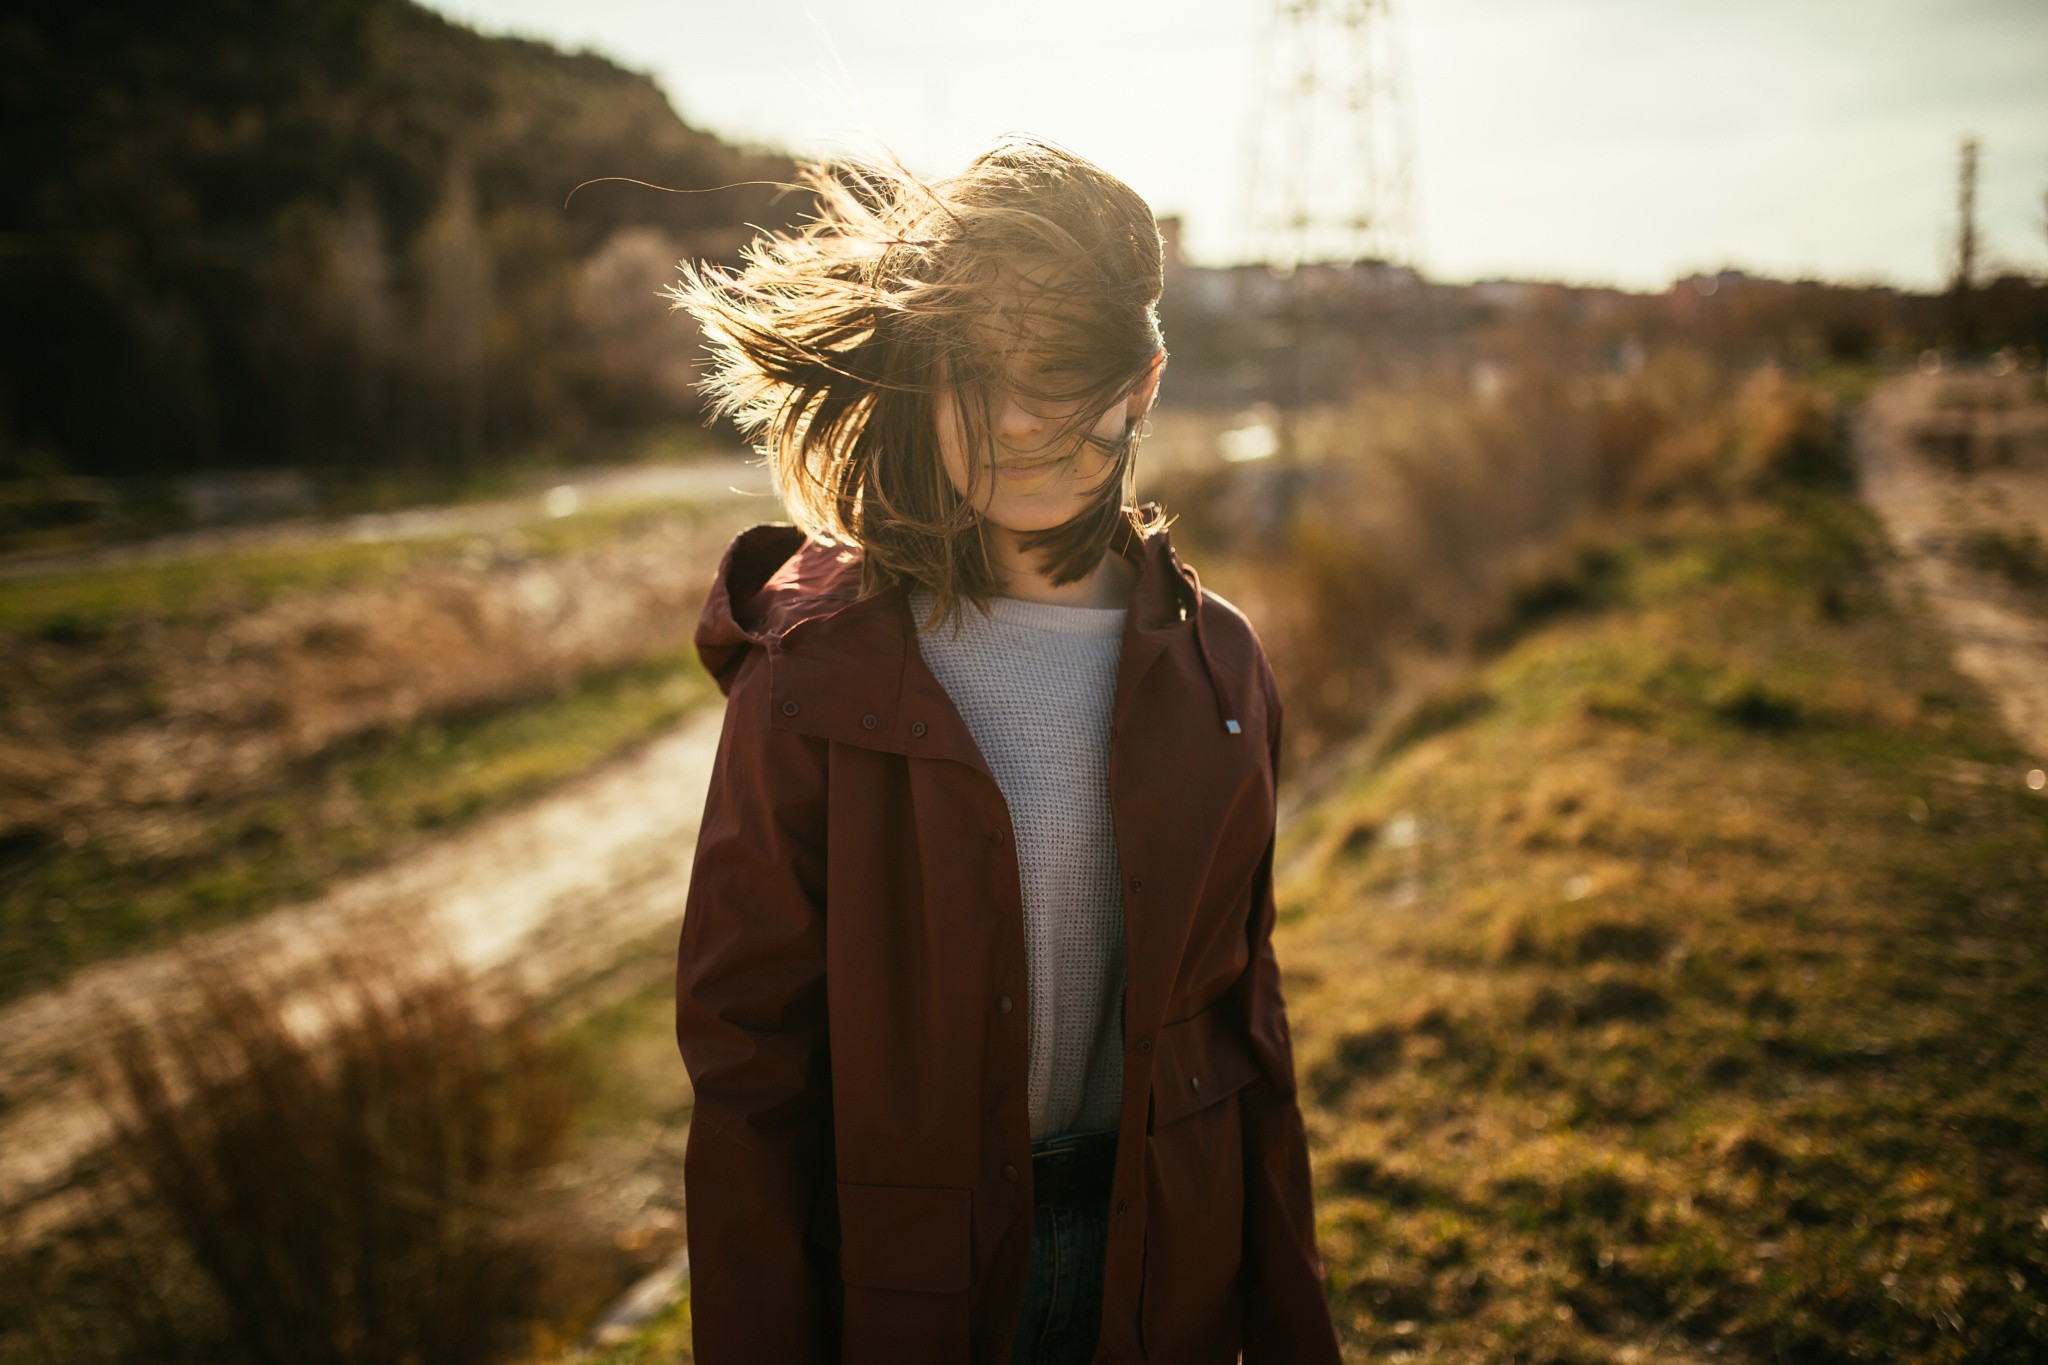 People 2048x1365 brunette model women looking away plants trees mountains path tower smiling sunlight photography wind jacket hoods brown coat windy hair in face road shoulder length hair open coat women outdoors hair blowing in the wind white sweater